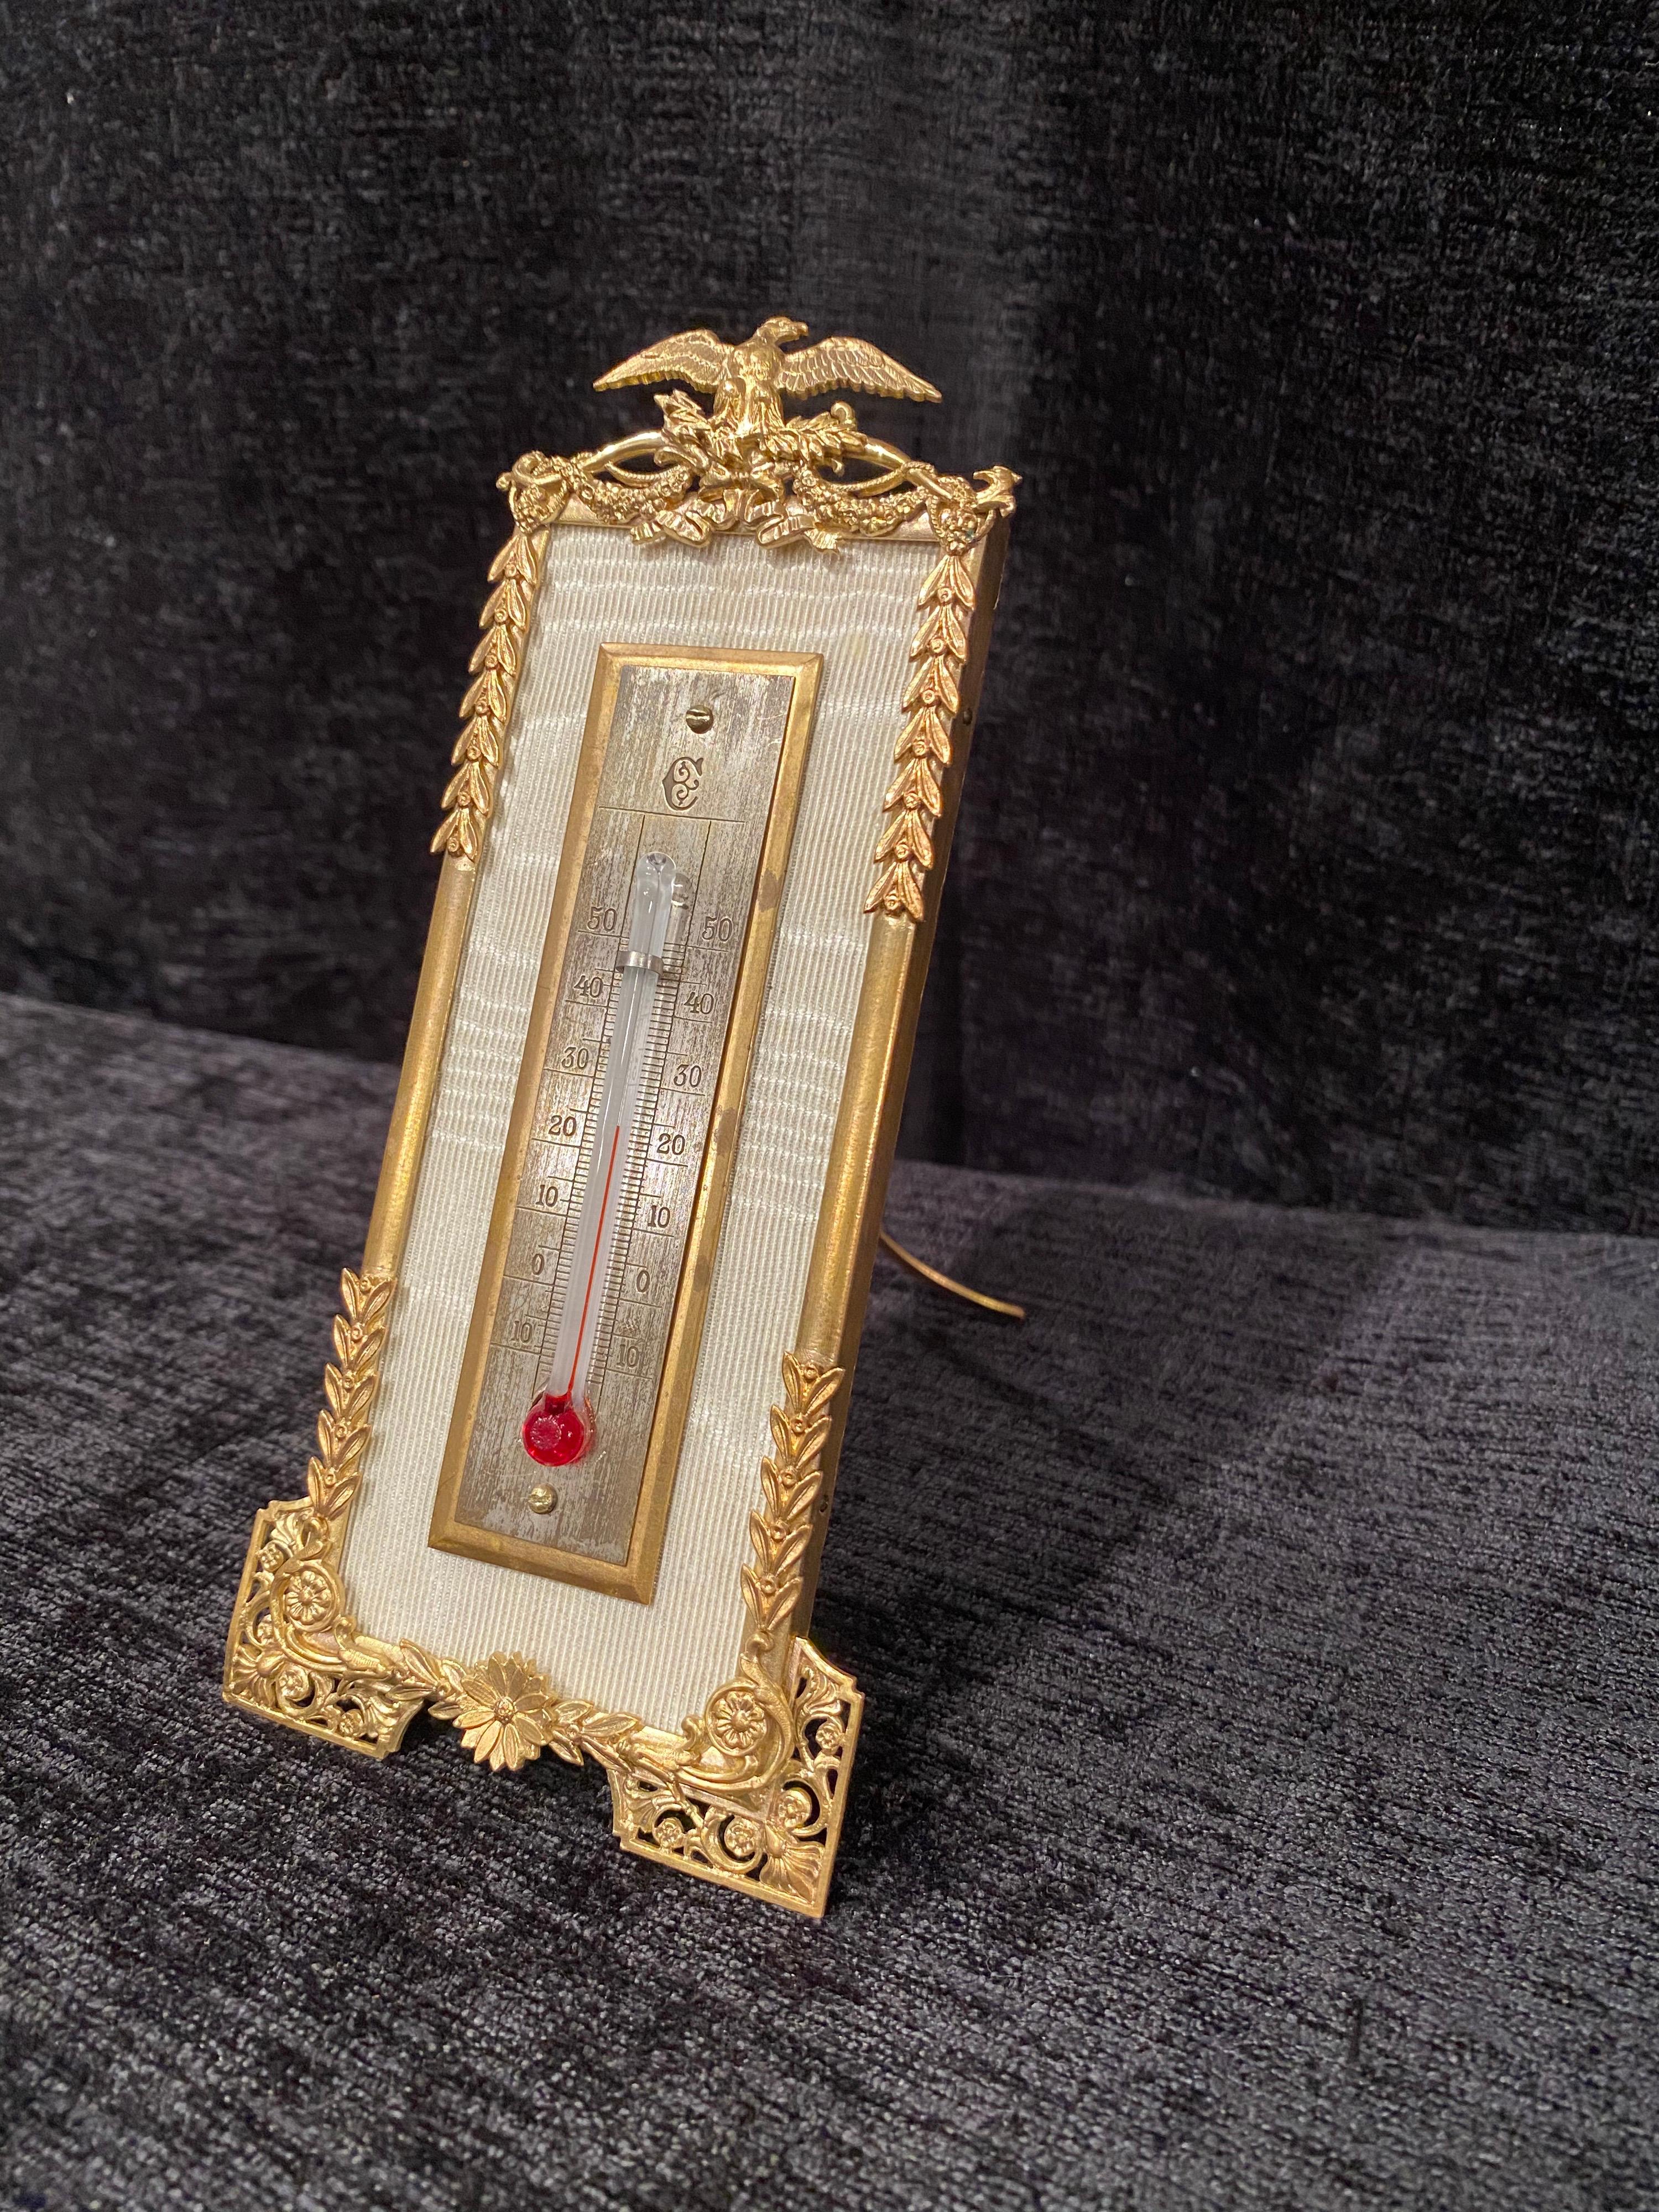 Desk or hanging thermometer
19th century, Celsius scale gilt bronze frame.
Wood panel covered in silk with a silver plated
plate mounted on a gilt-bronze plate.